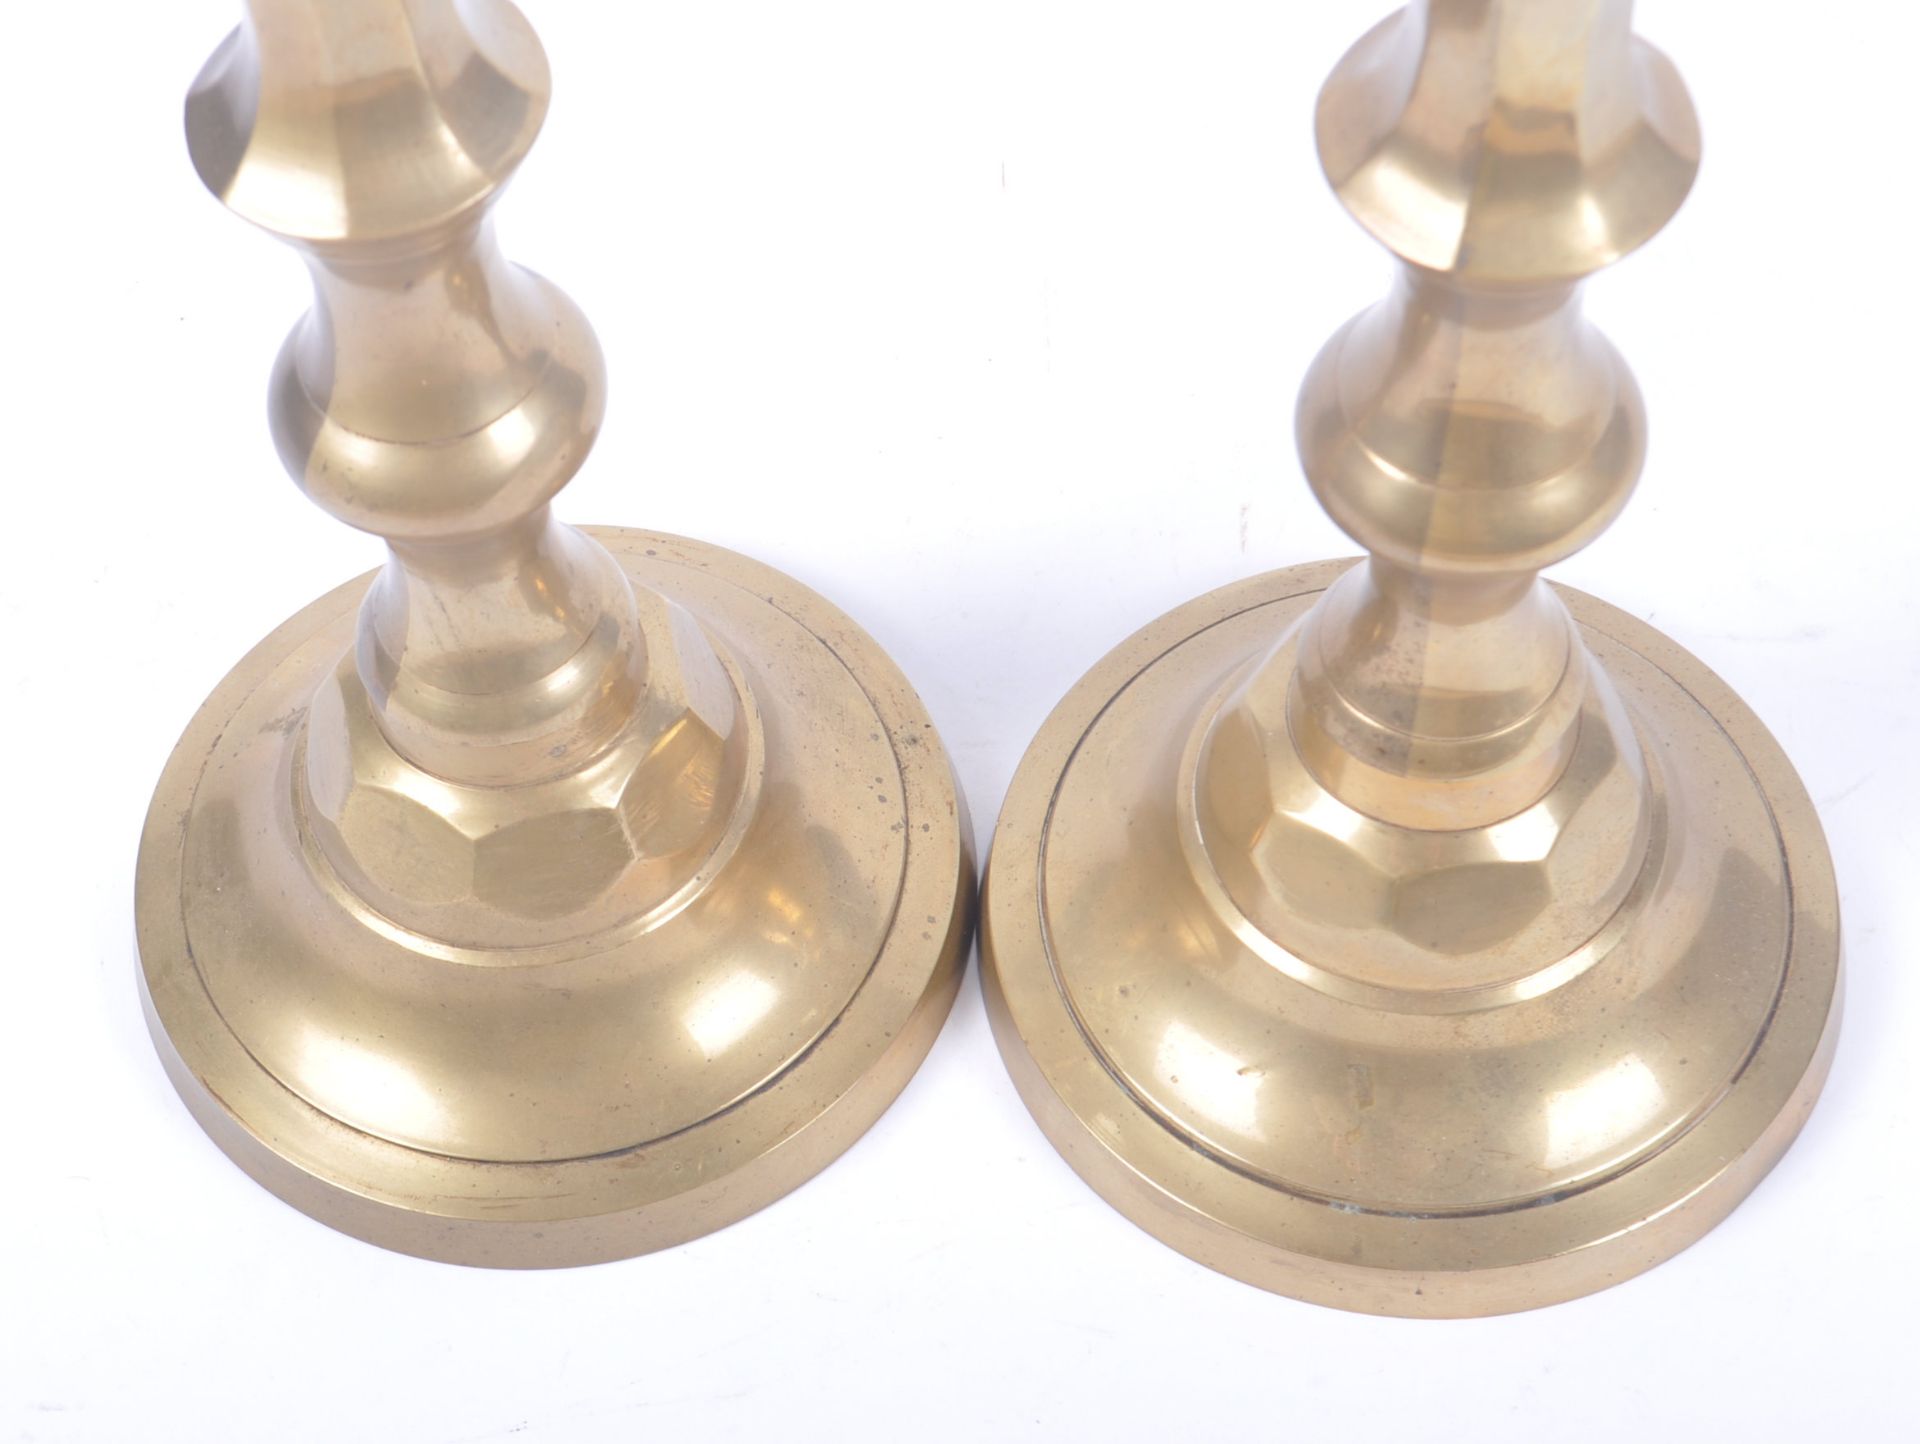 PAIR OF LARGE 19TH CENTURY BRASS CANDLESTICKS - Image 5 of 5